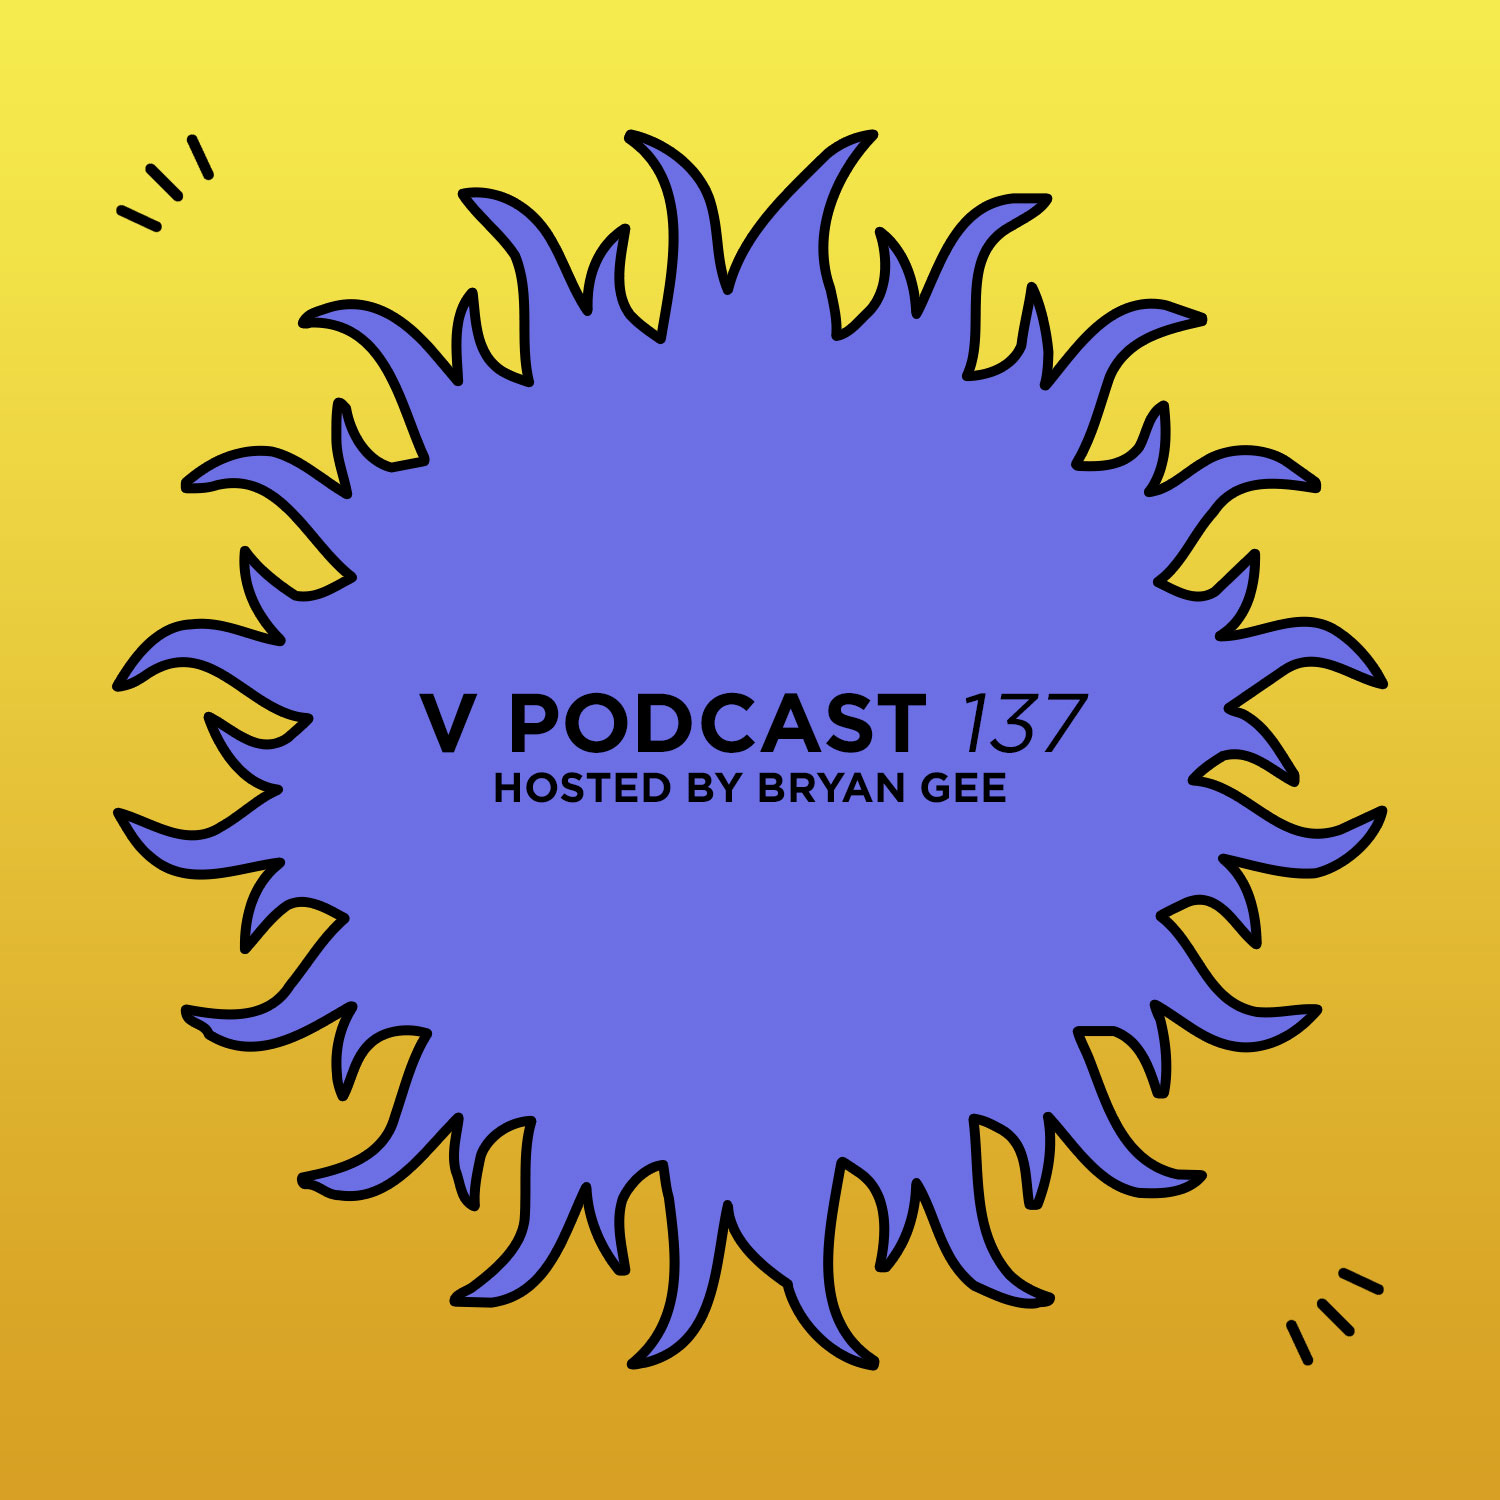 V Podcast 137 - Hosted by Bryan Gee Artwork